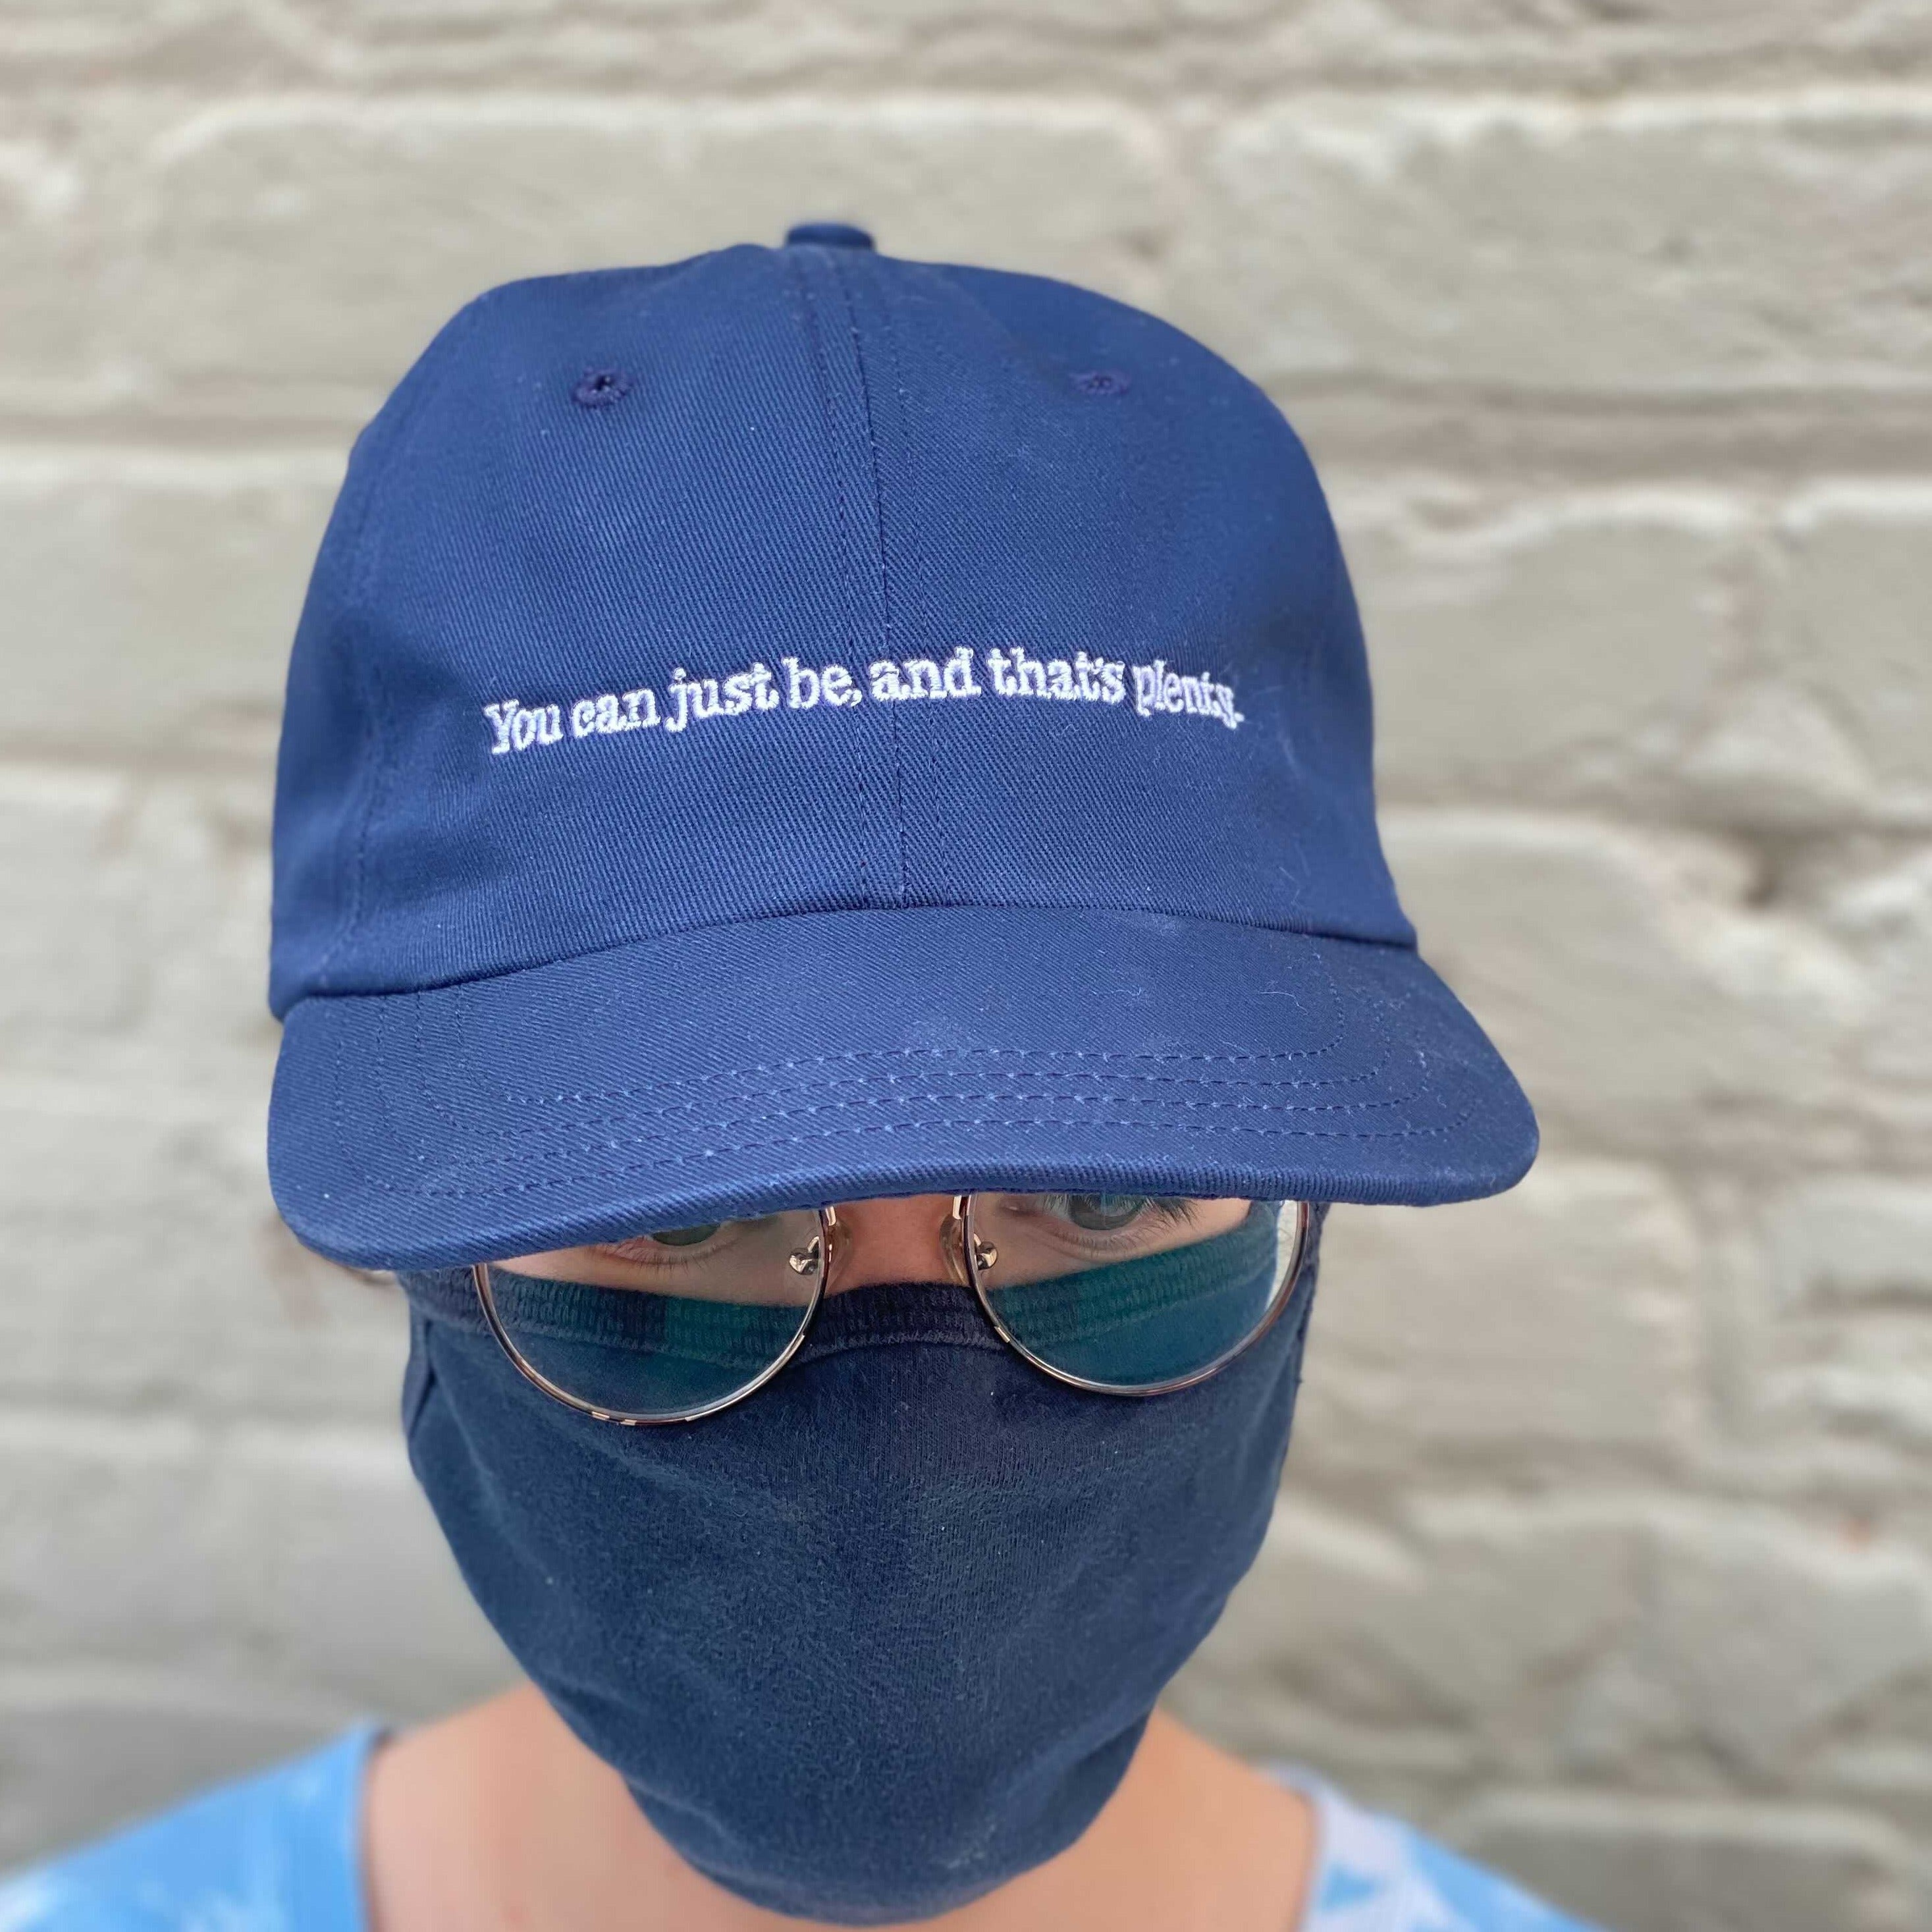 Person wearing Alice Walker "You can just be, and that's plenty" cap